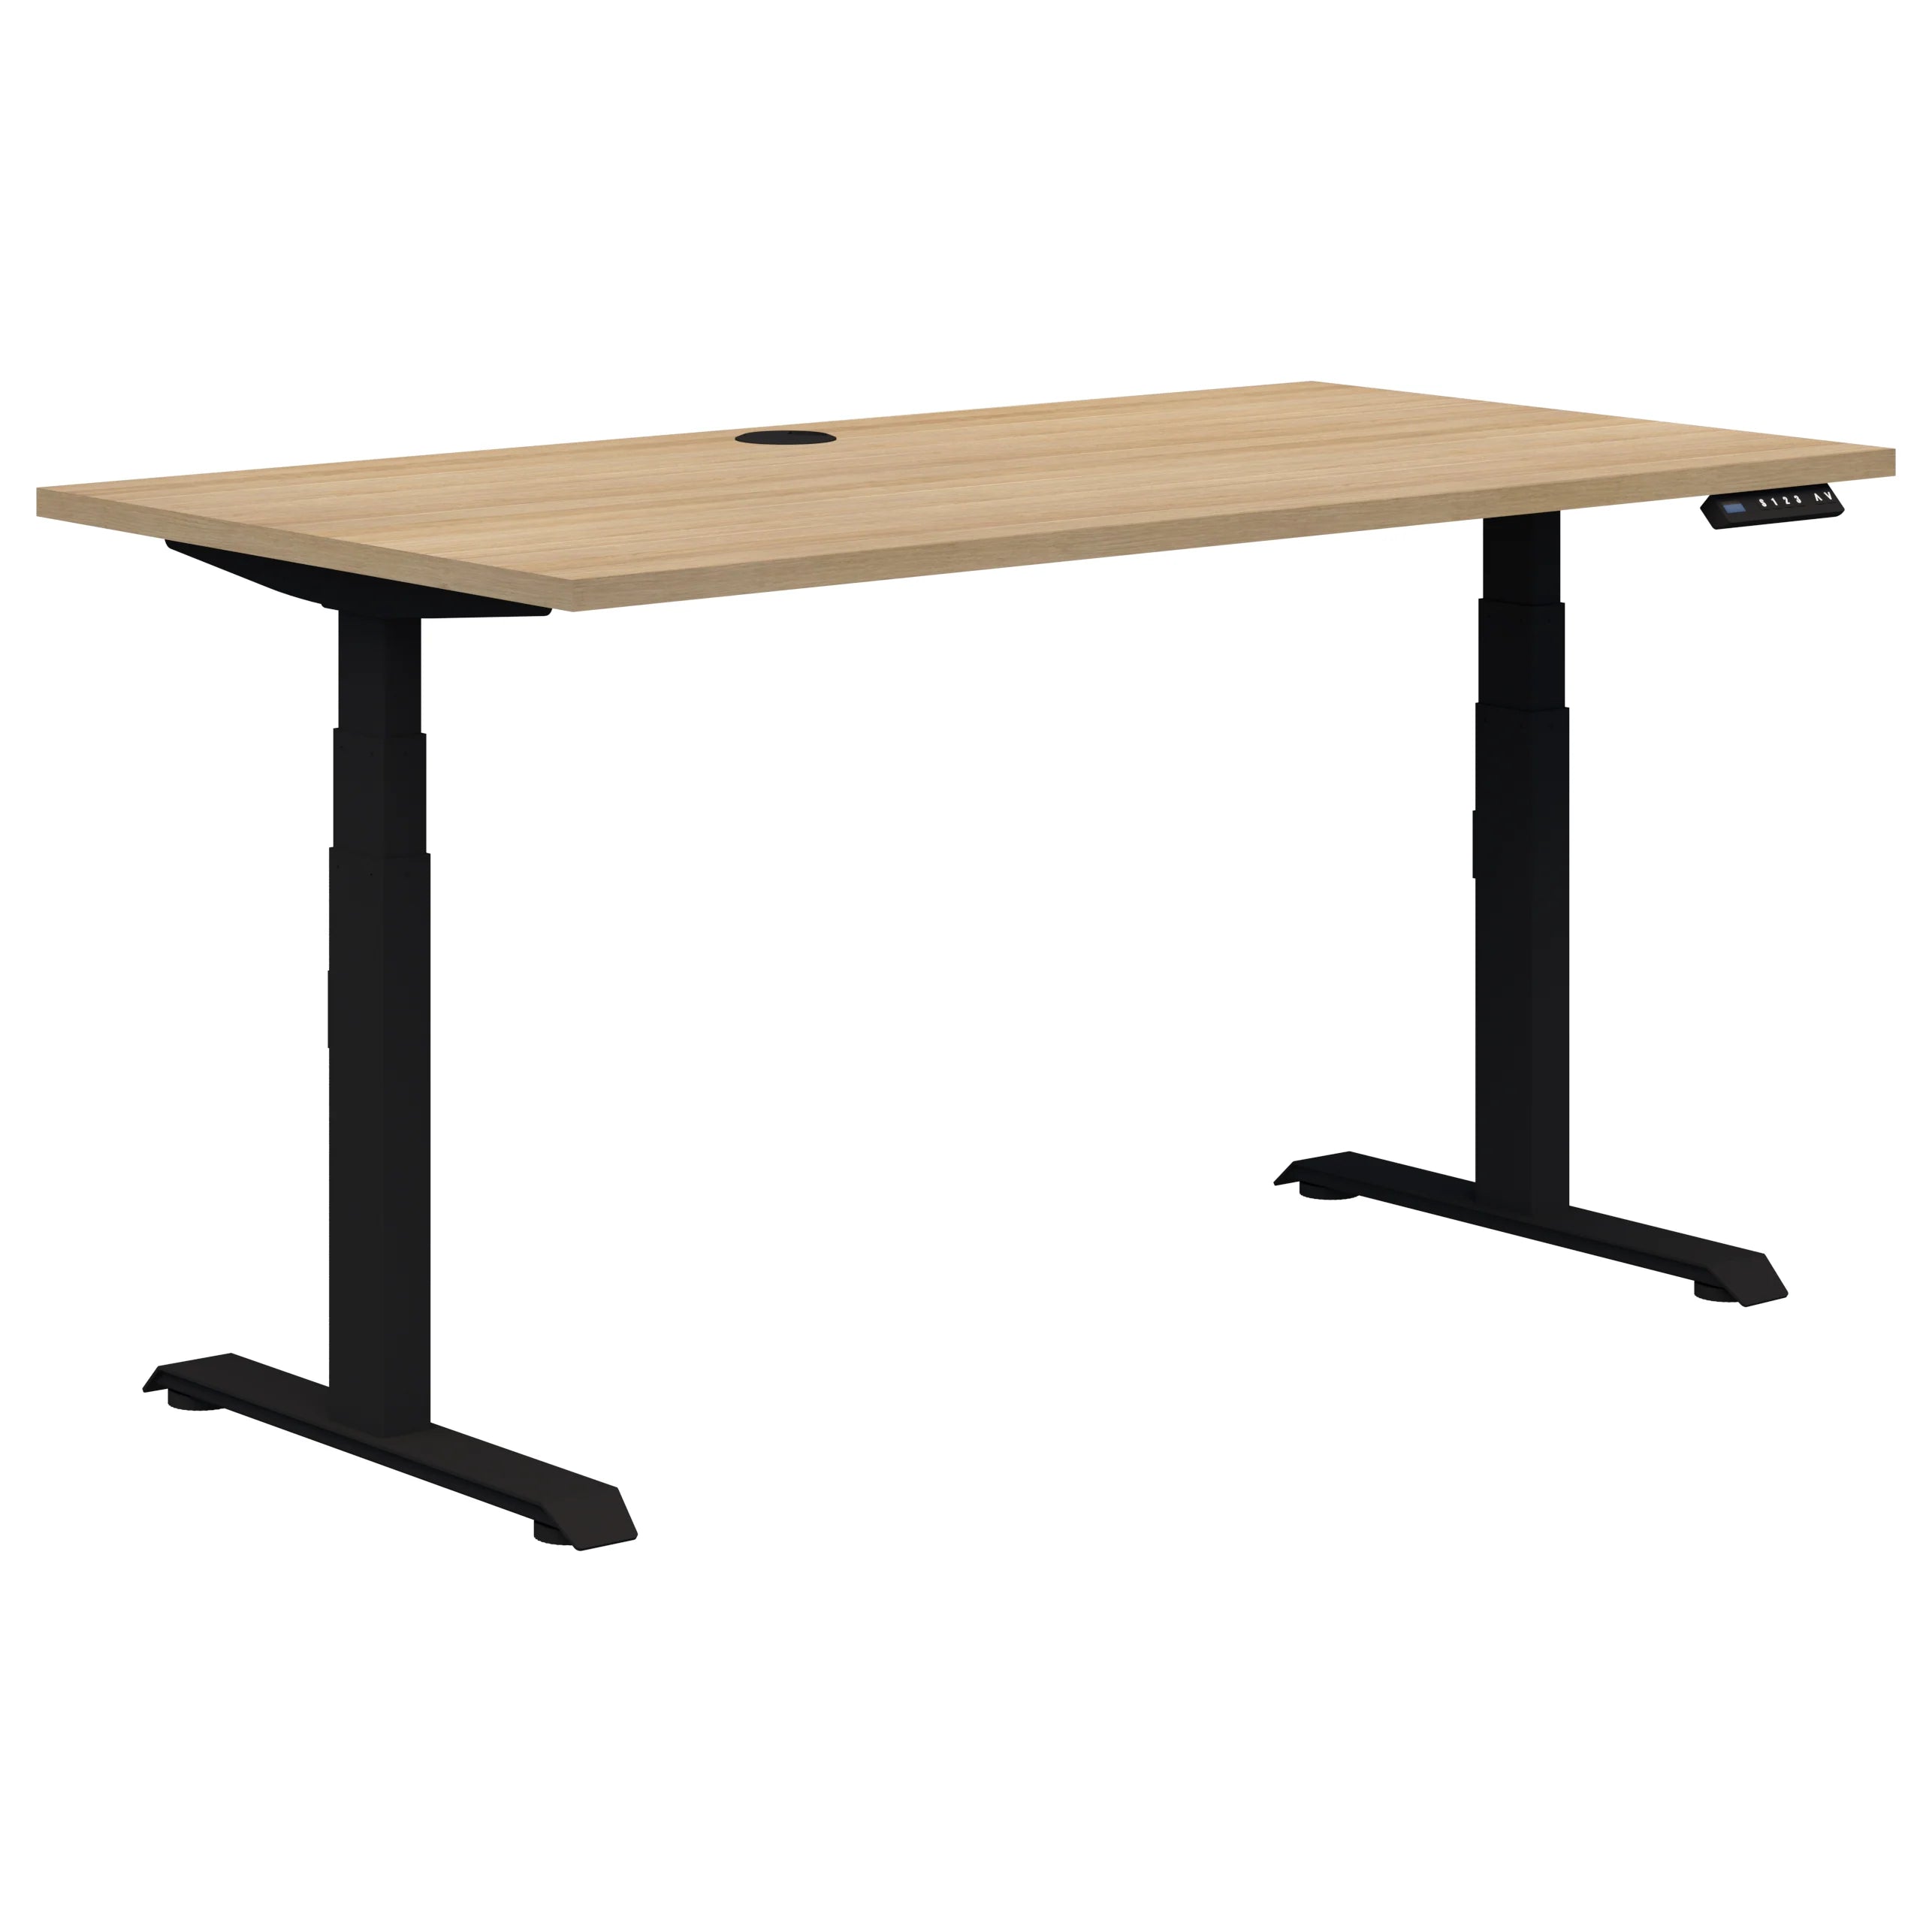 Summit electric height adjustable office desk with black frame and classic oak top.